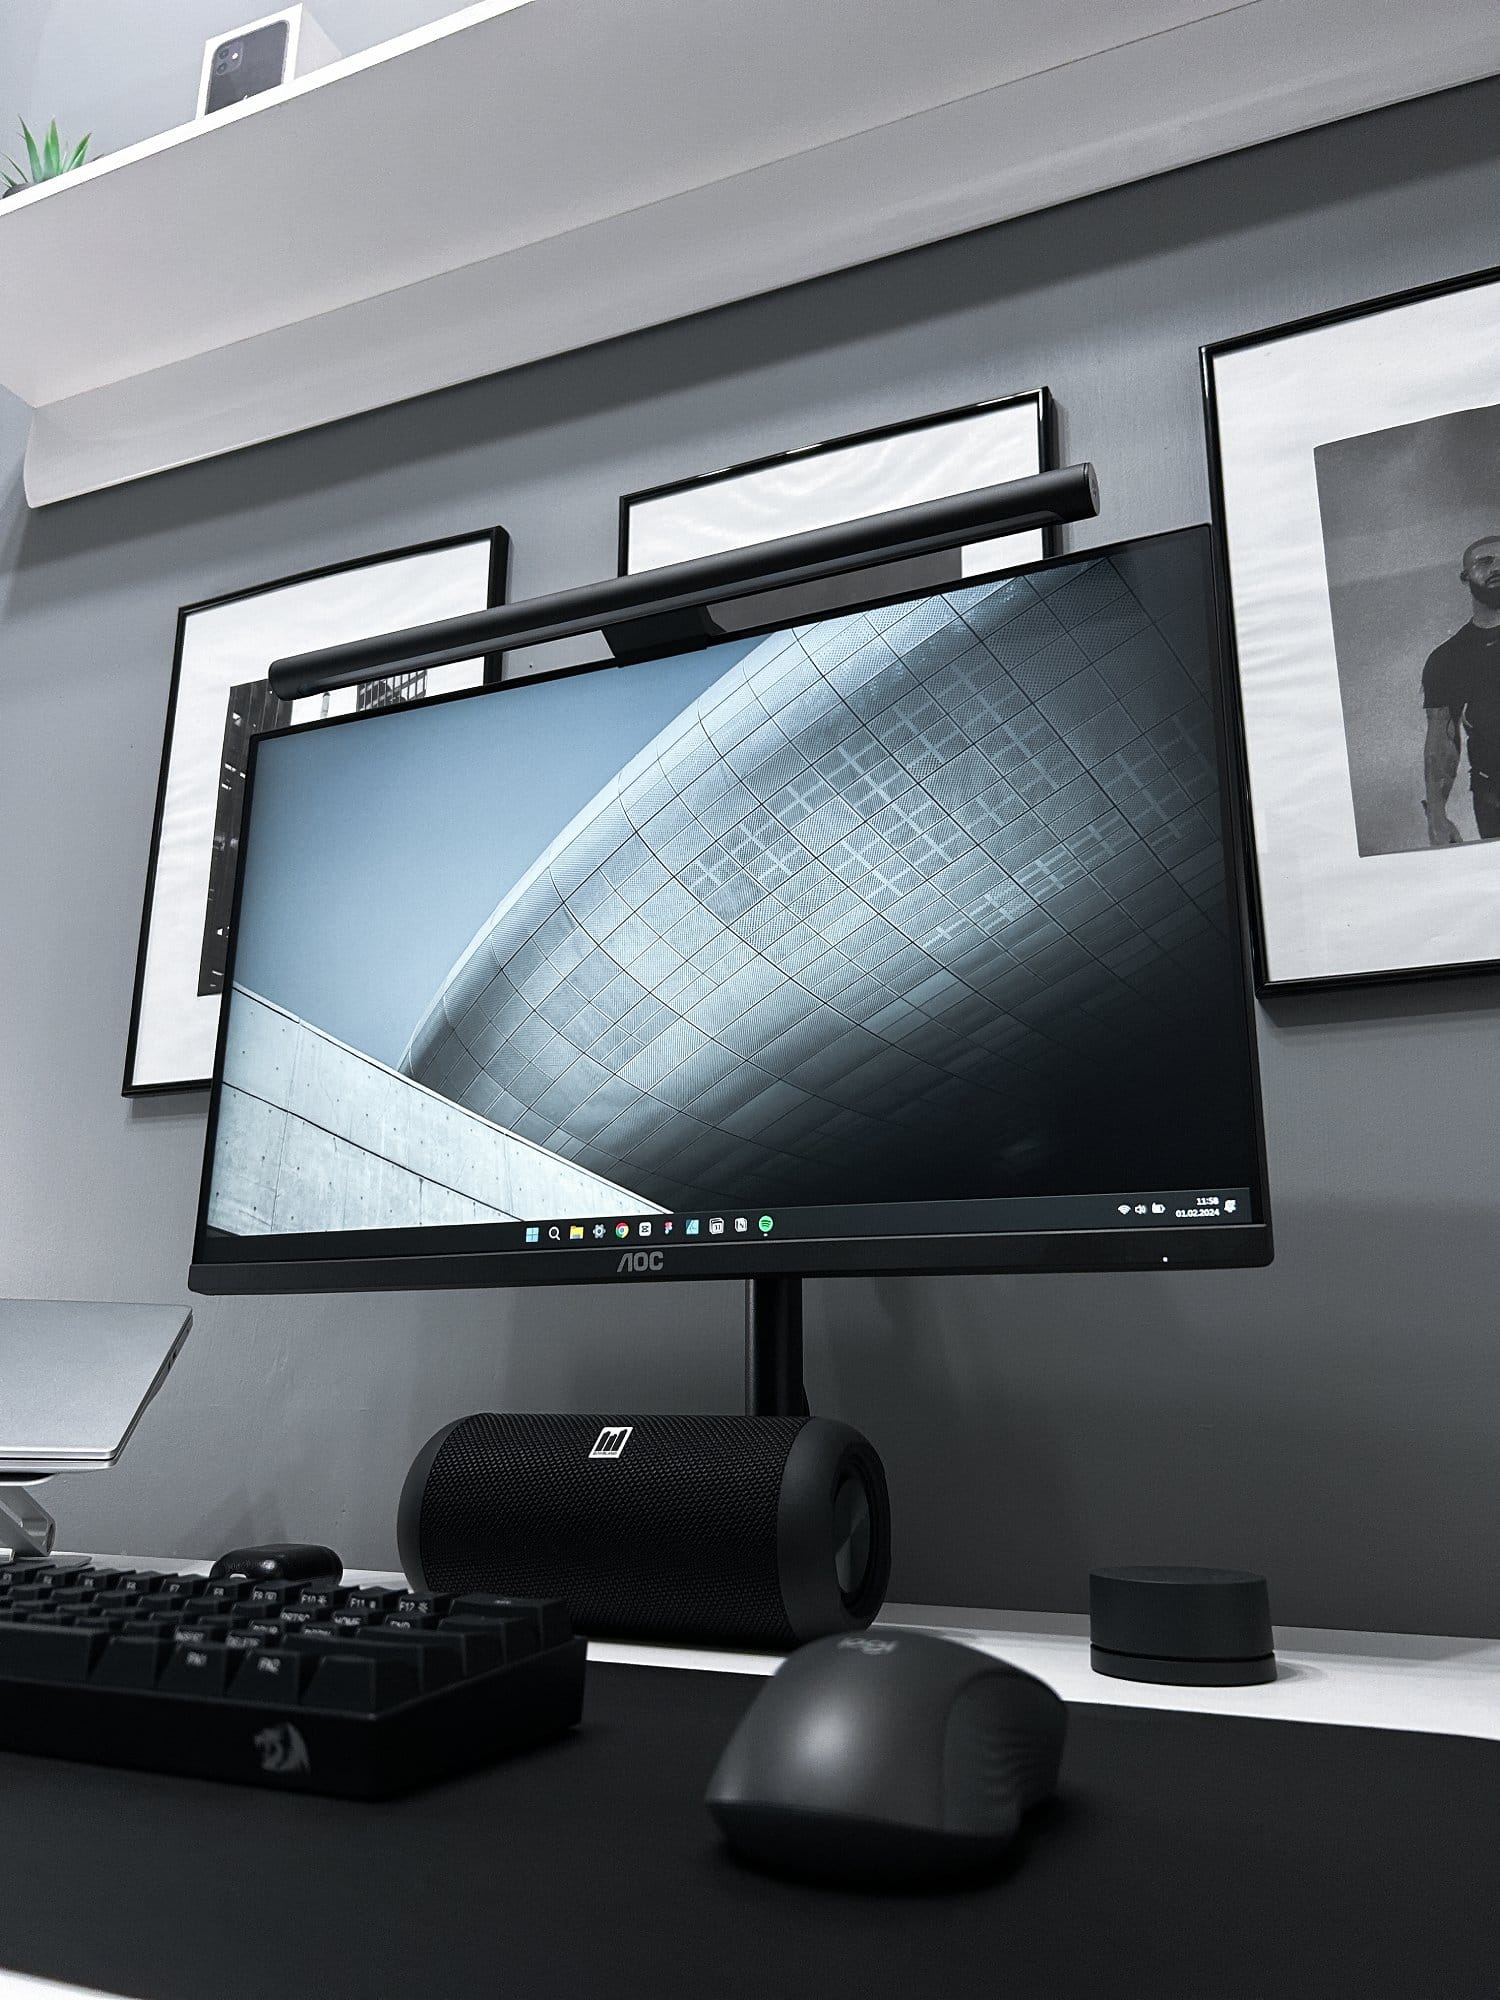 A home office setup with a large monitor, mechanical keyboard, speaker, and mouse on a desk, with monochrome framed pictures on the grey wall above